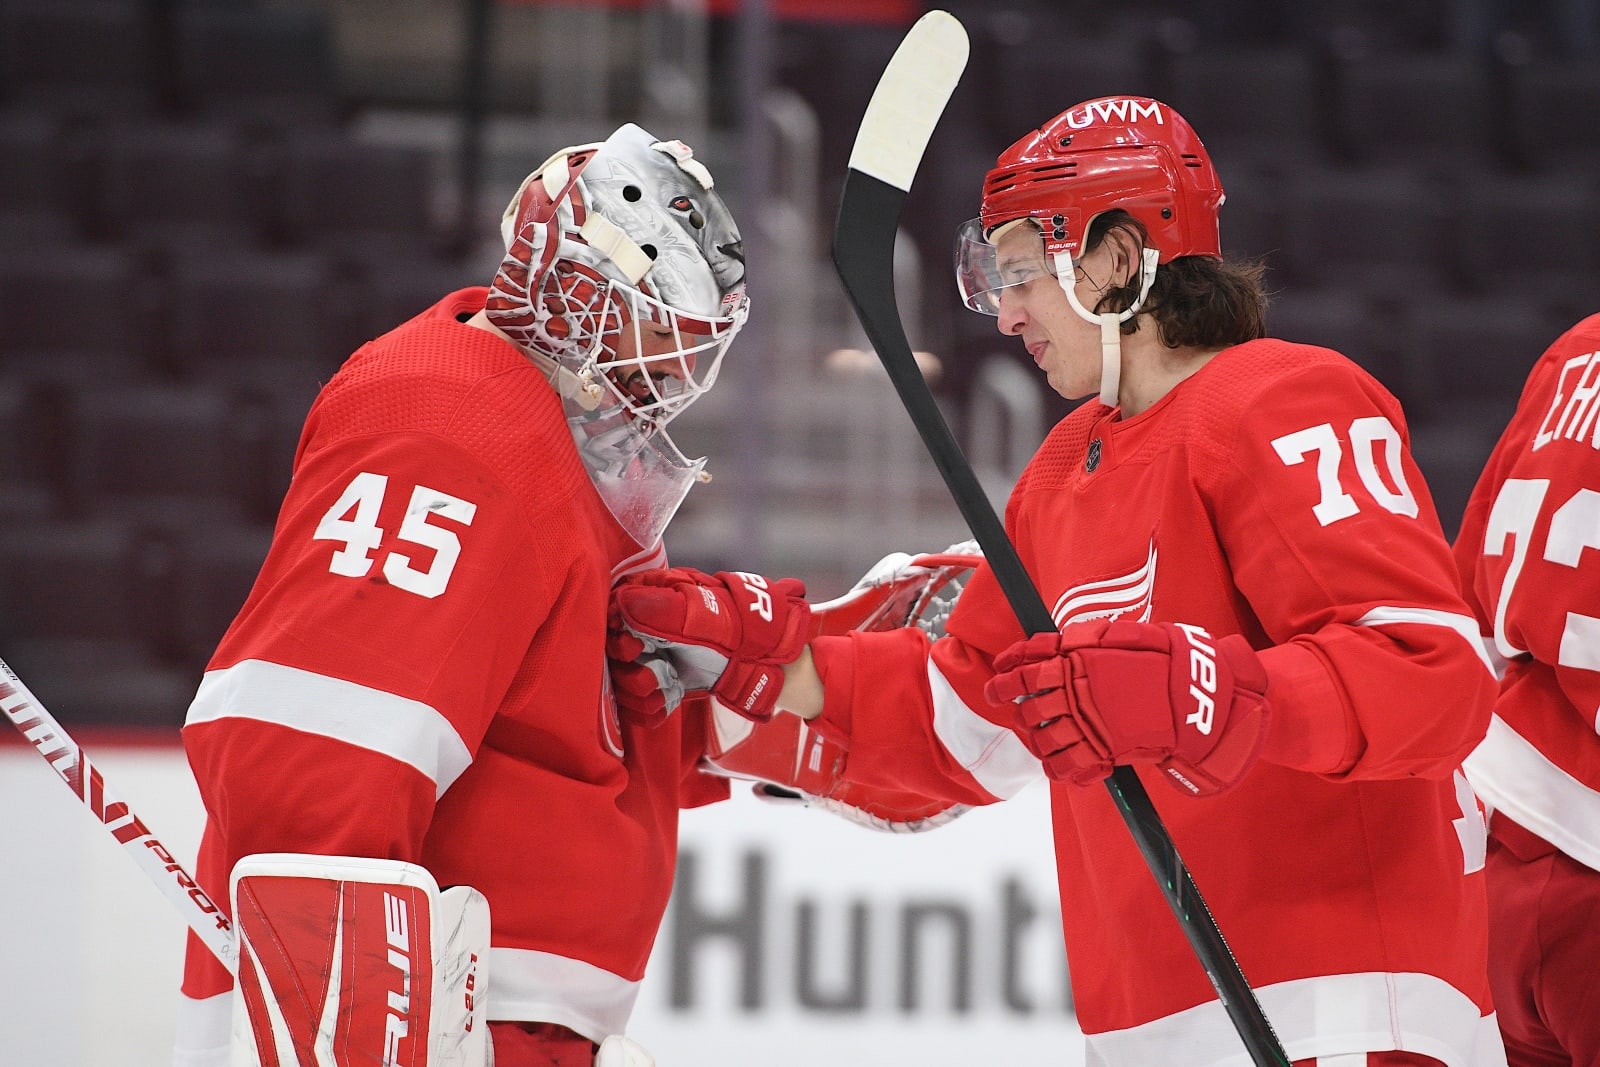 detroit red wings protected list